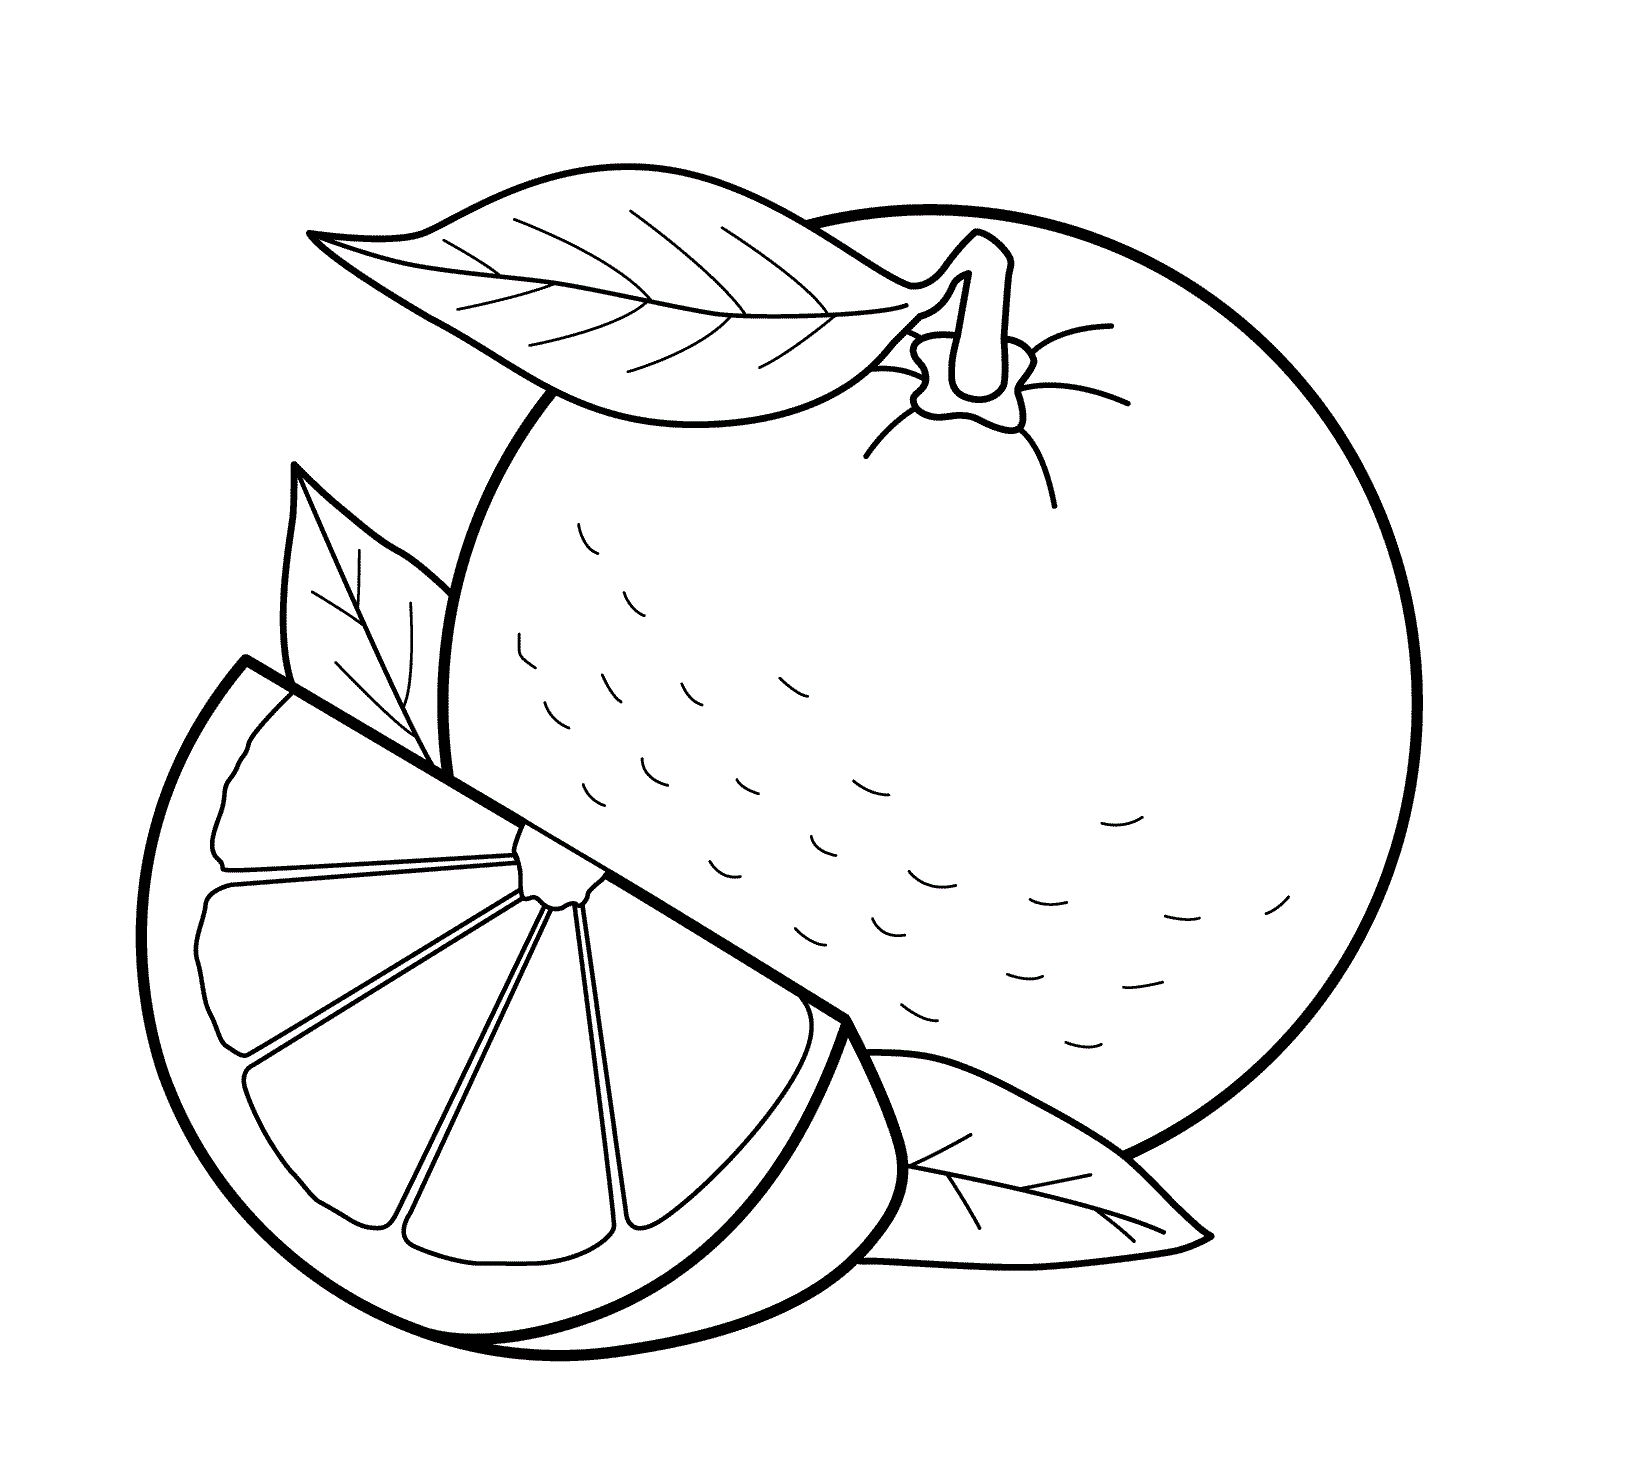 orange image colouring pages